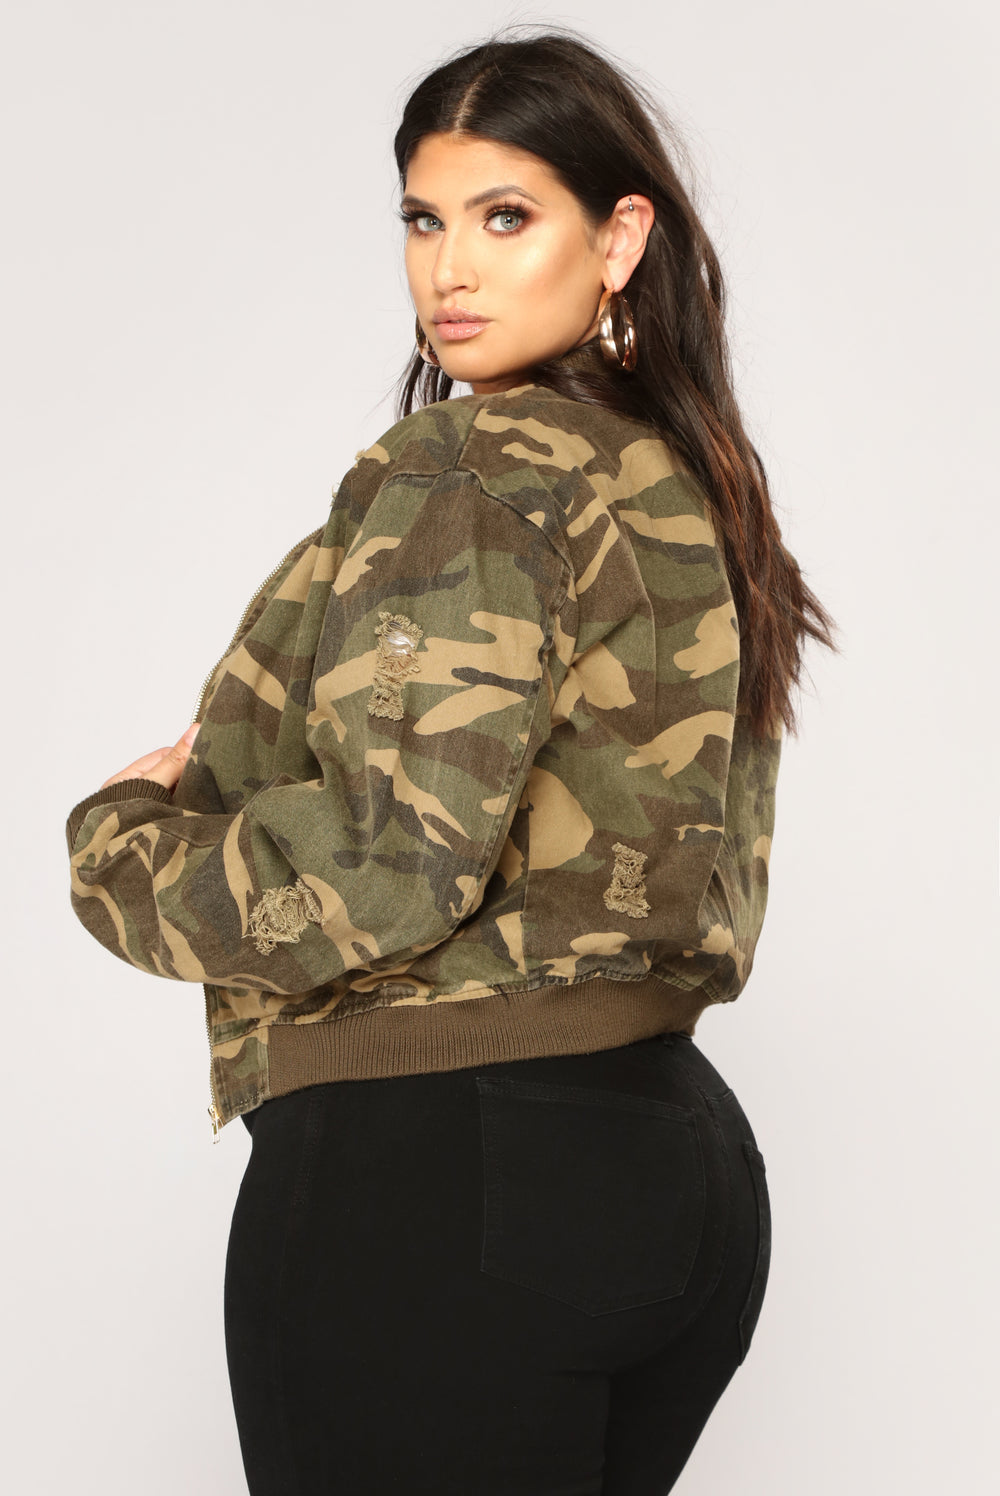 Camouflage In The City Jacket - Camo